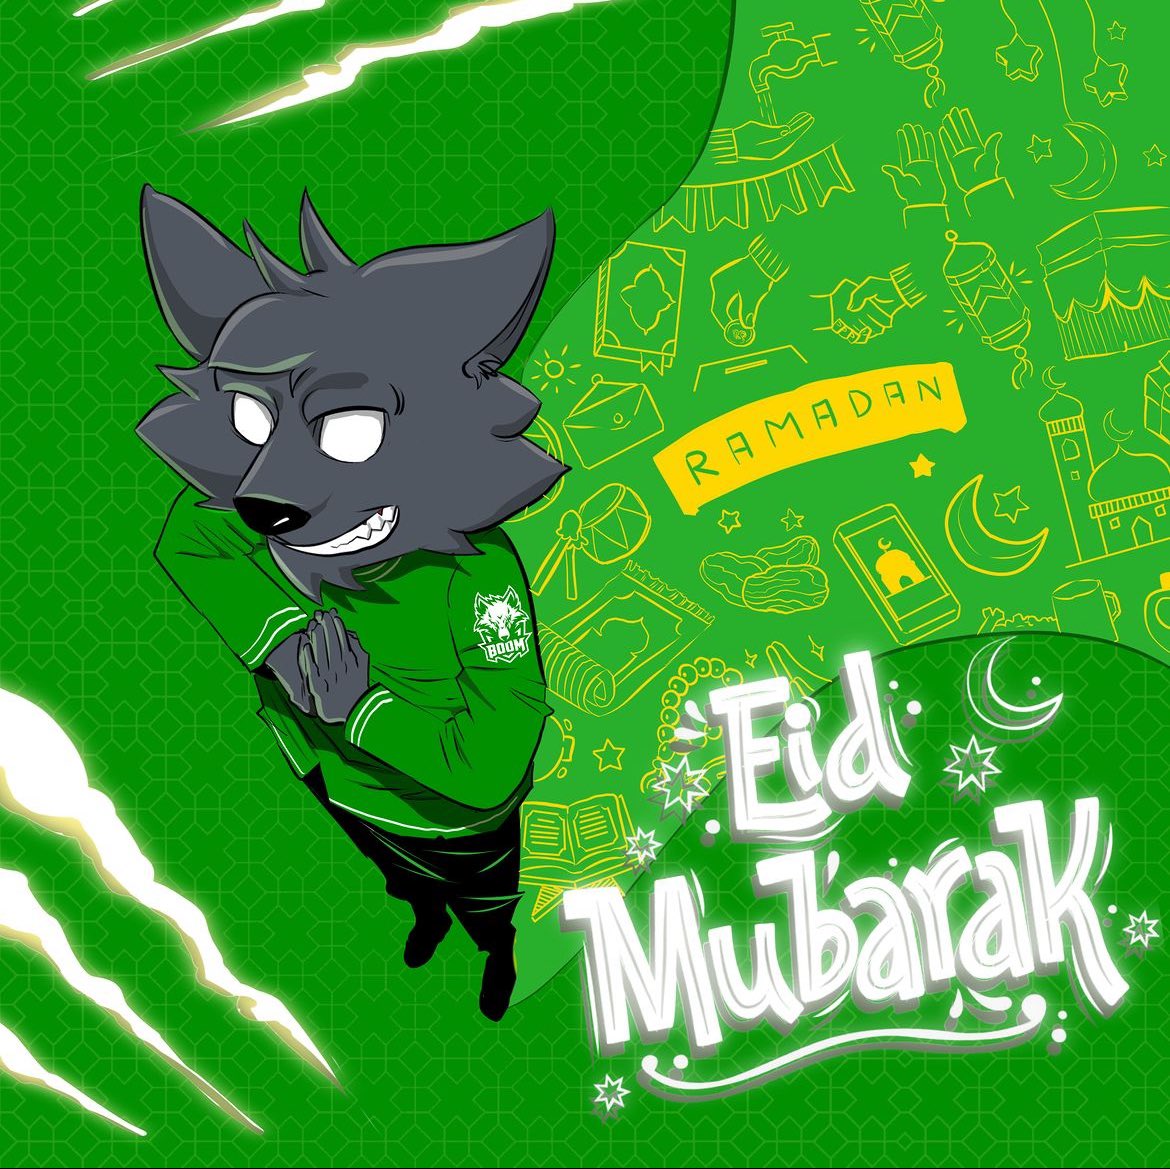 BOOM Esports wishes everyone Eid Mubarak! May this joyous day bring you peace, prosperity and blessings! ❤️🙏